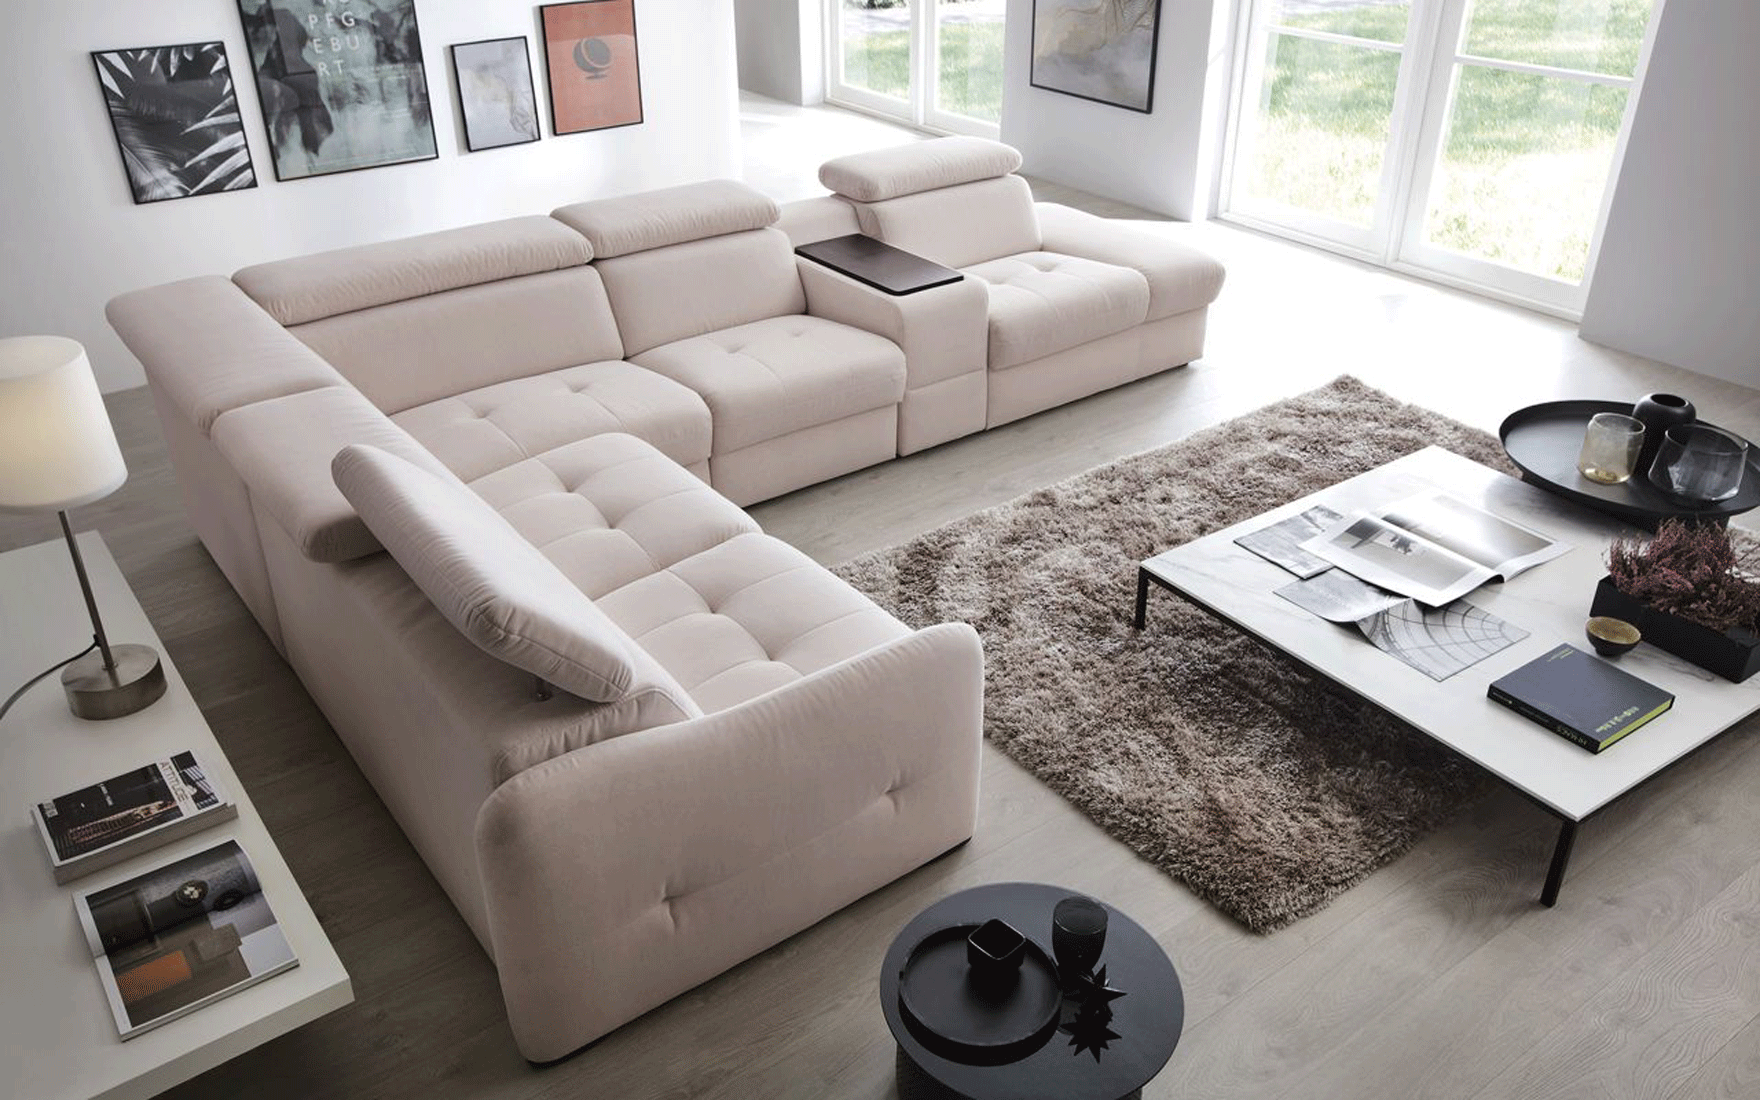 Almighty Burgundy Learning Domani Sectional w/Recliner, storage, Galla Leather Collection, Europe,  Brands